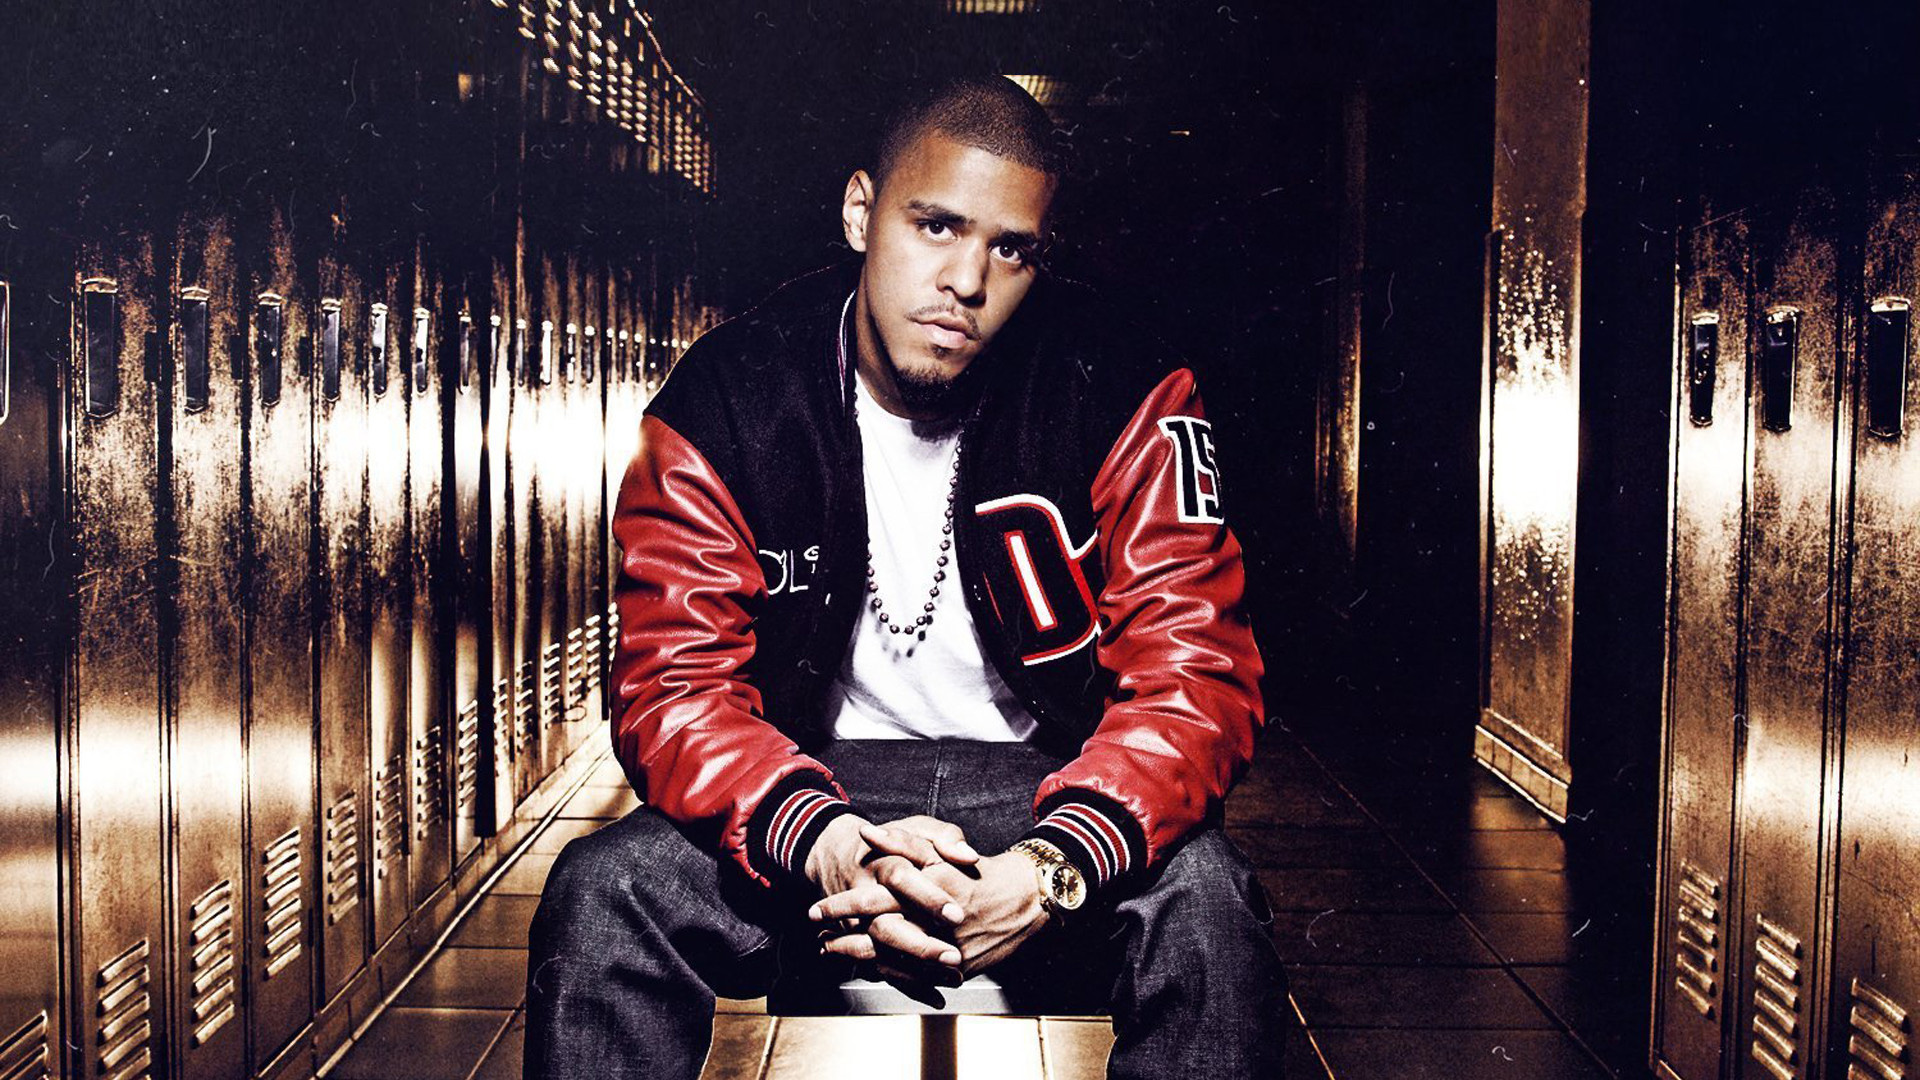 J Cole Is Sitting On Chair Wearing White T-shirt And Red Black Overcoat 2K Music